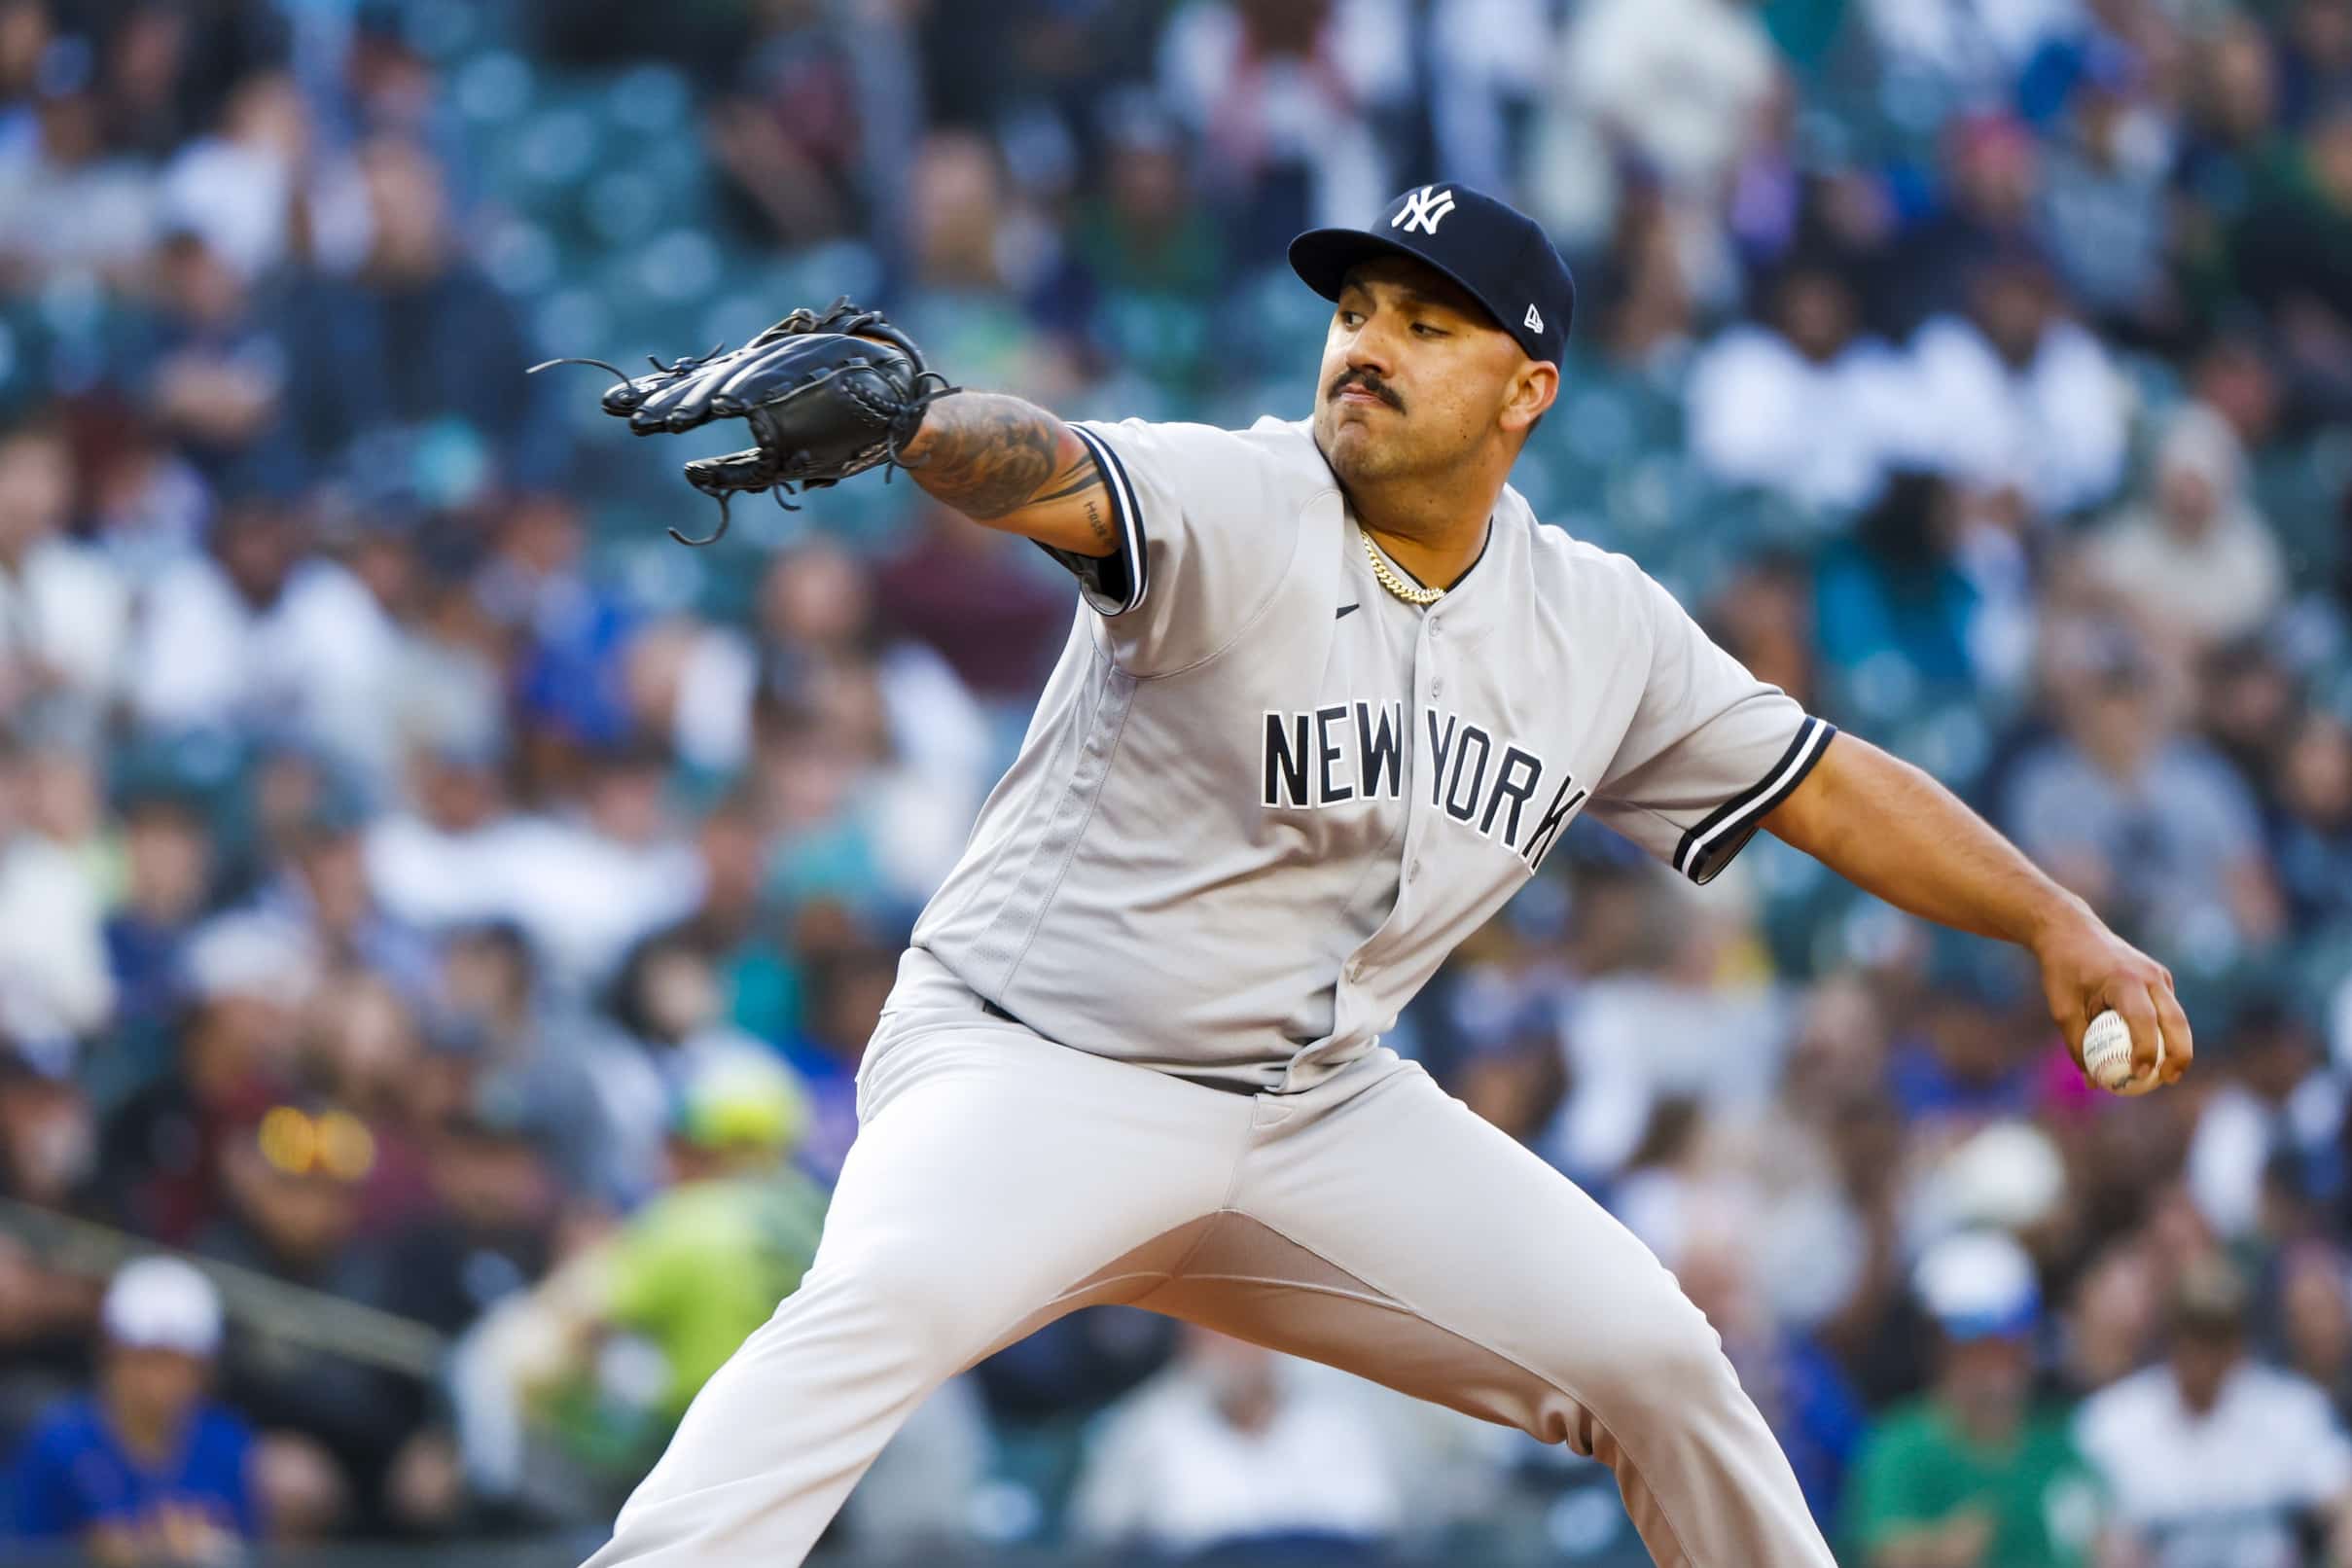 Yankees pitcher Nestor Cortes to return from IL this weekend after missing  two months